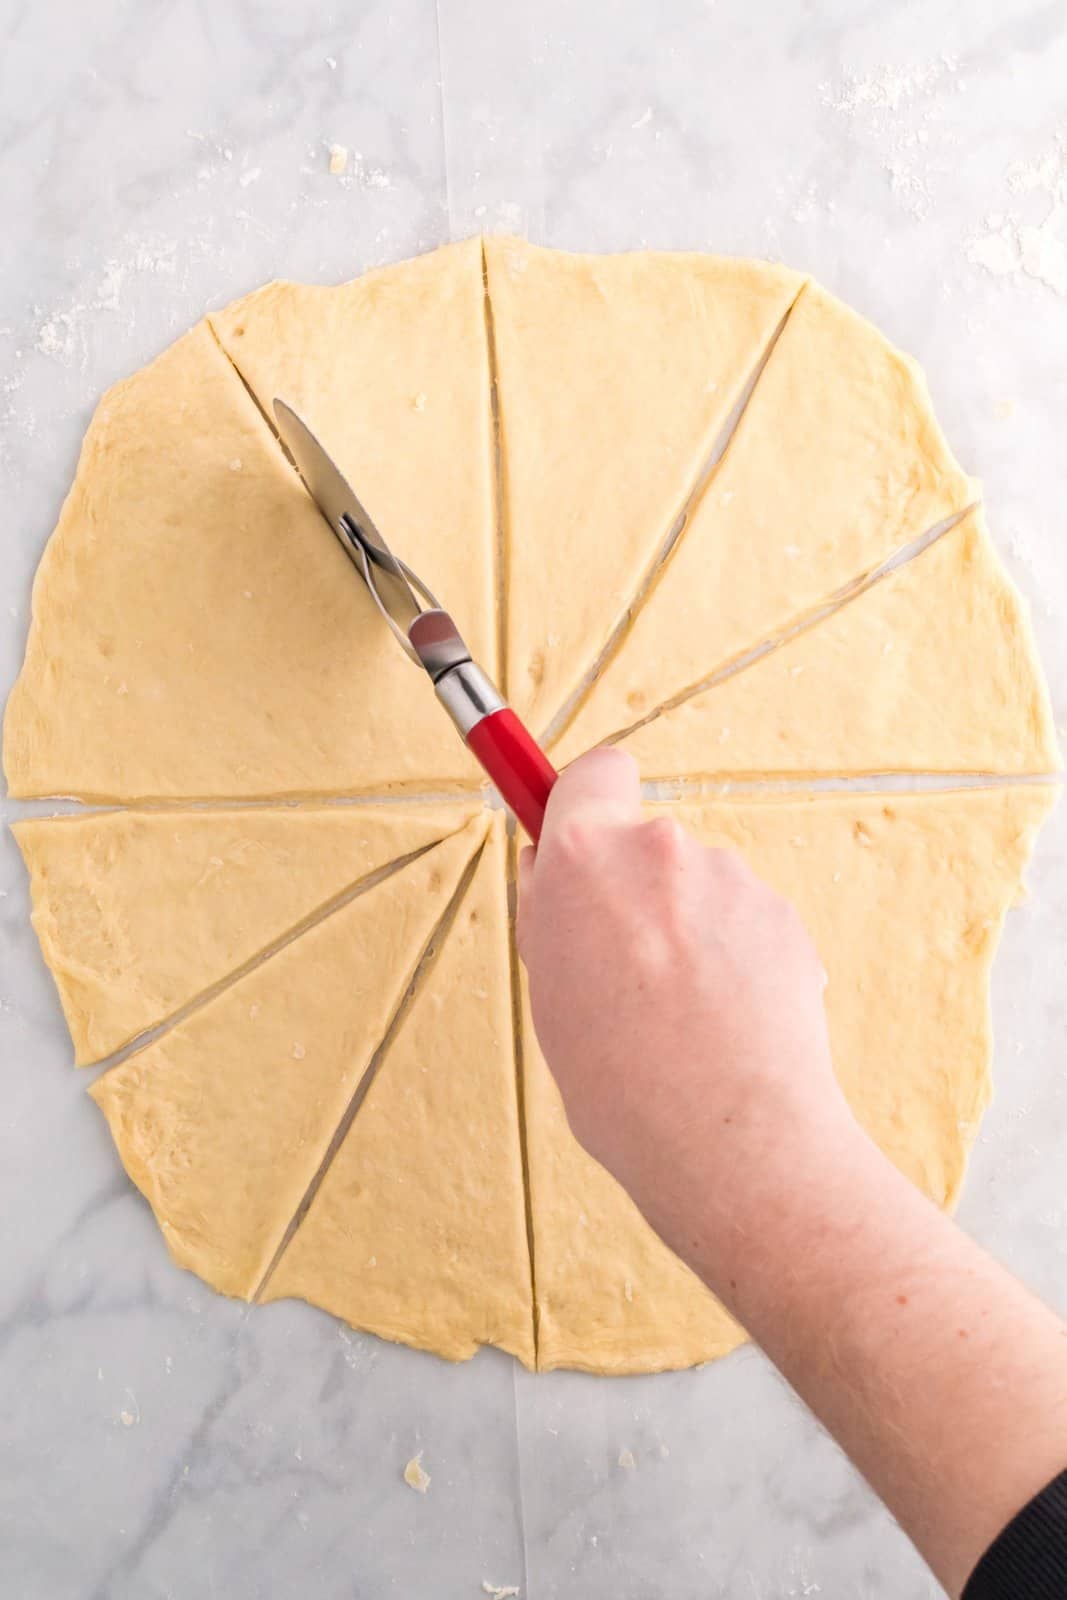 Dough being cut into 12 triangles.